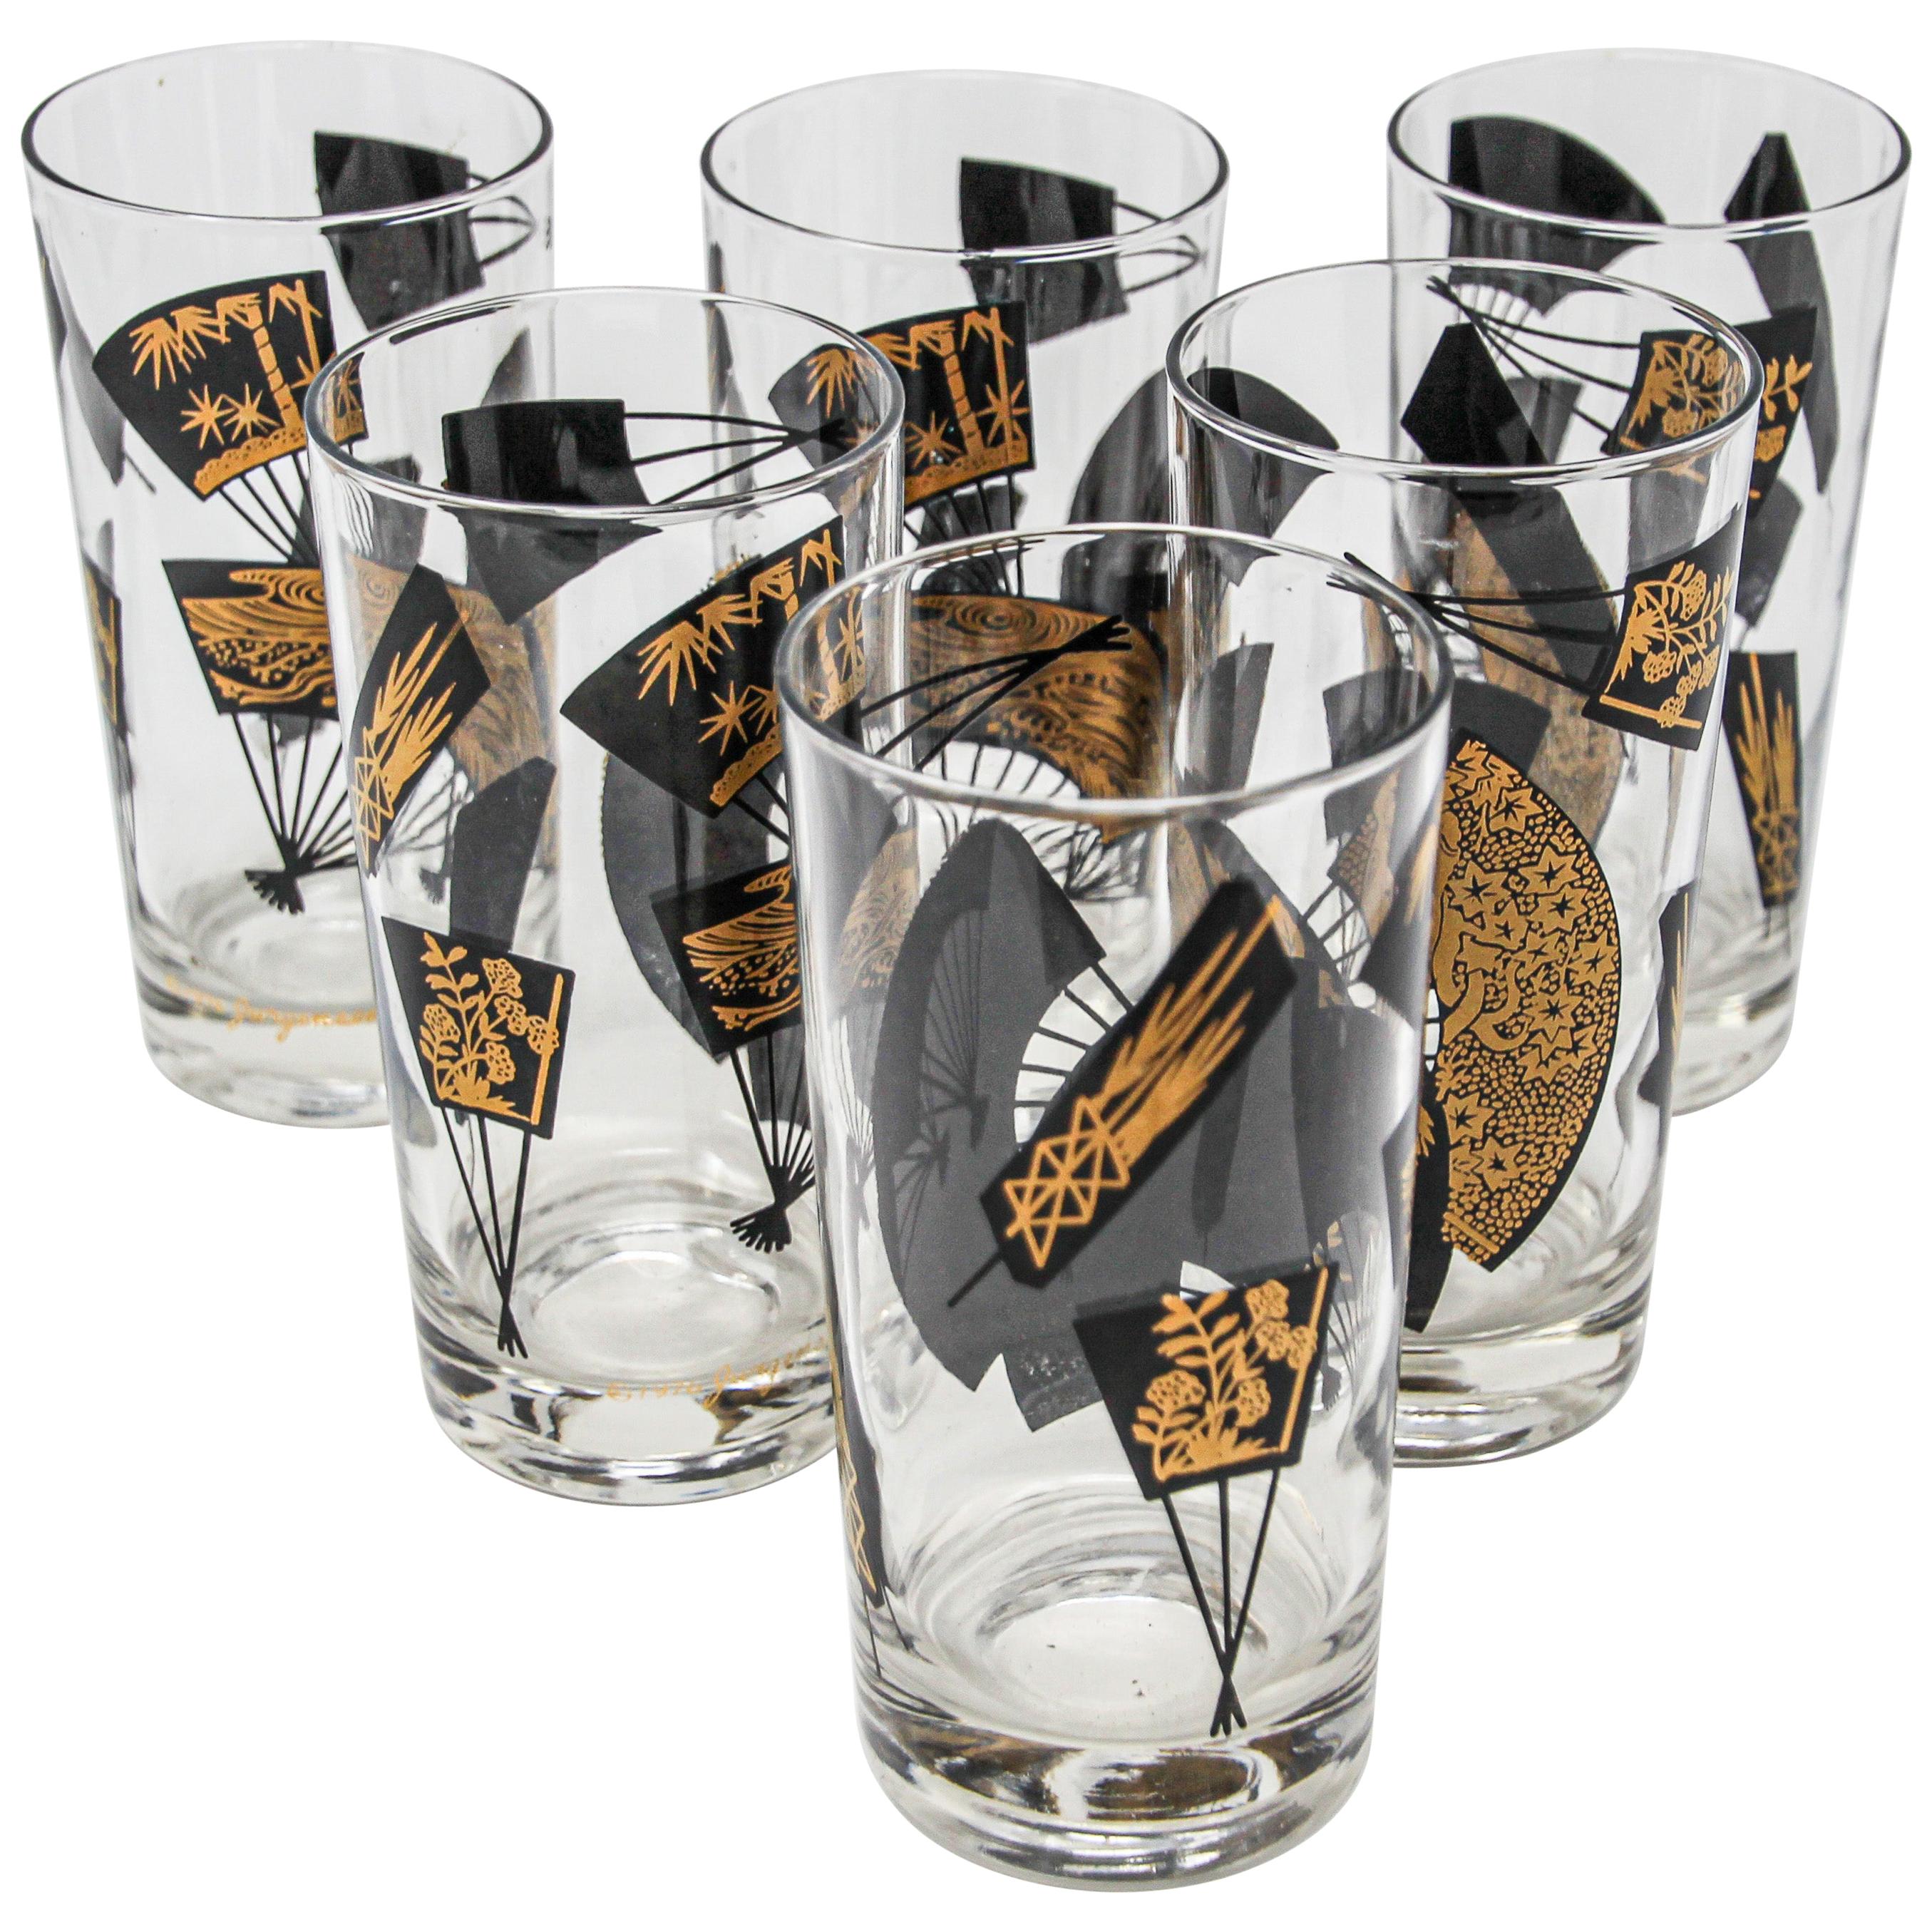 Set of Six Vintage Highball Glasses Black and Gold by Gurgensen's, 1976